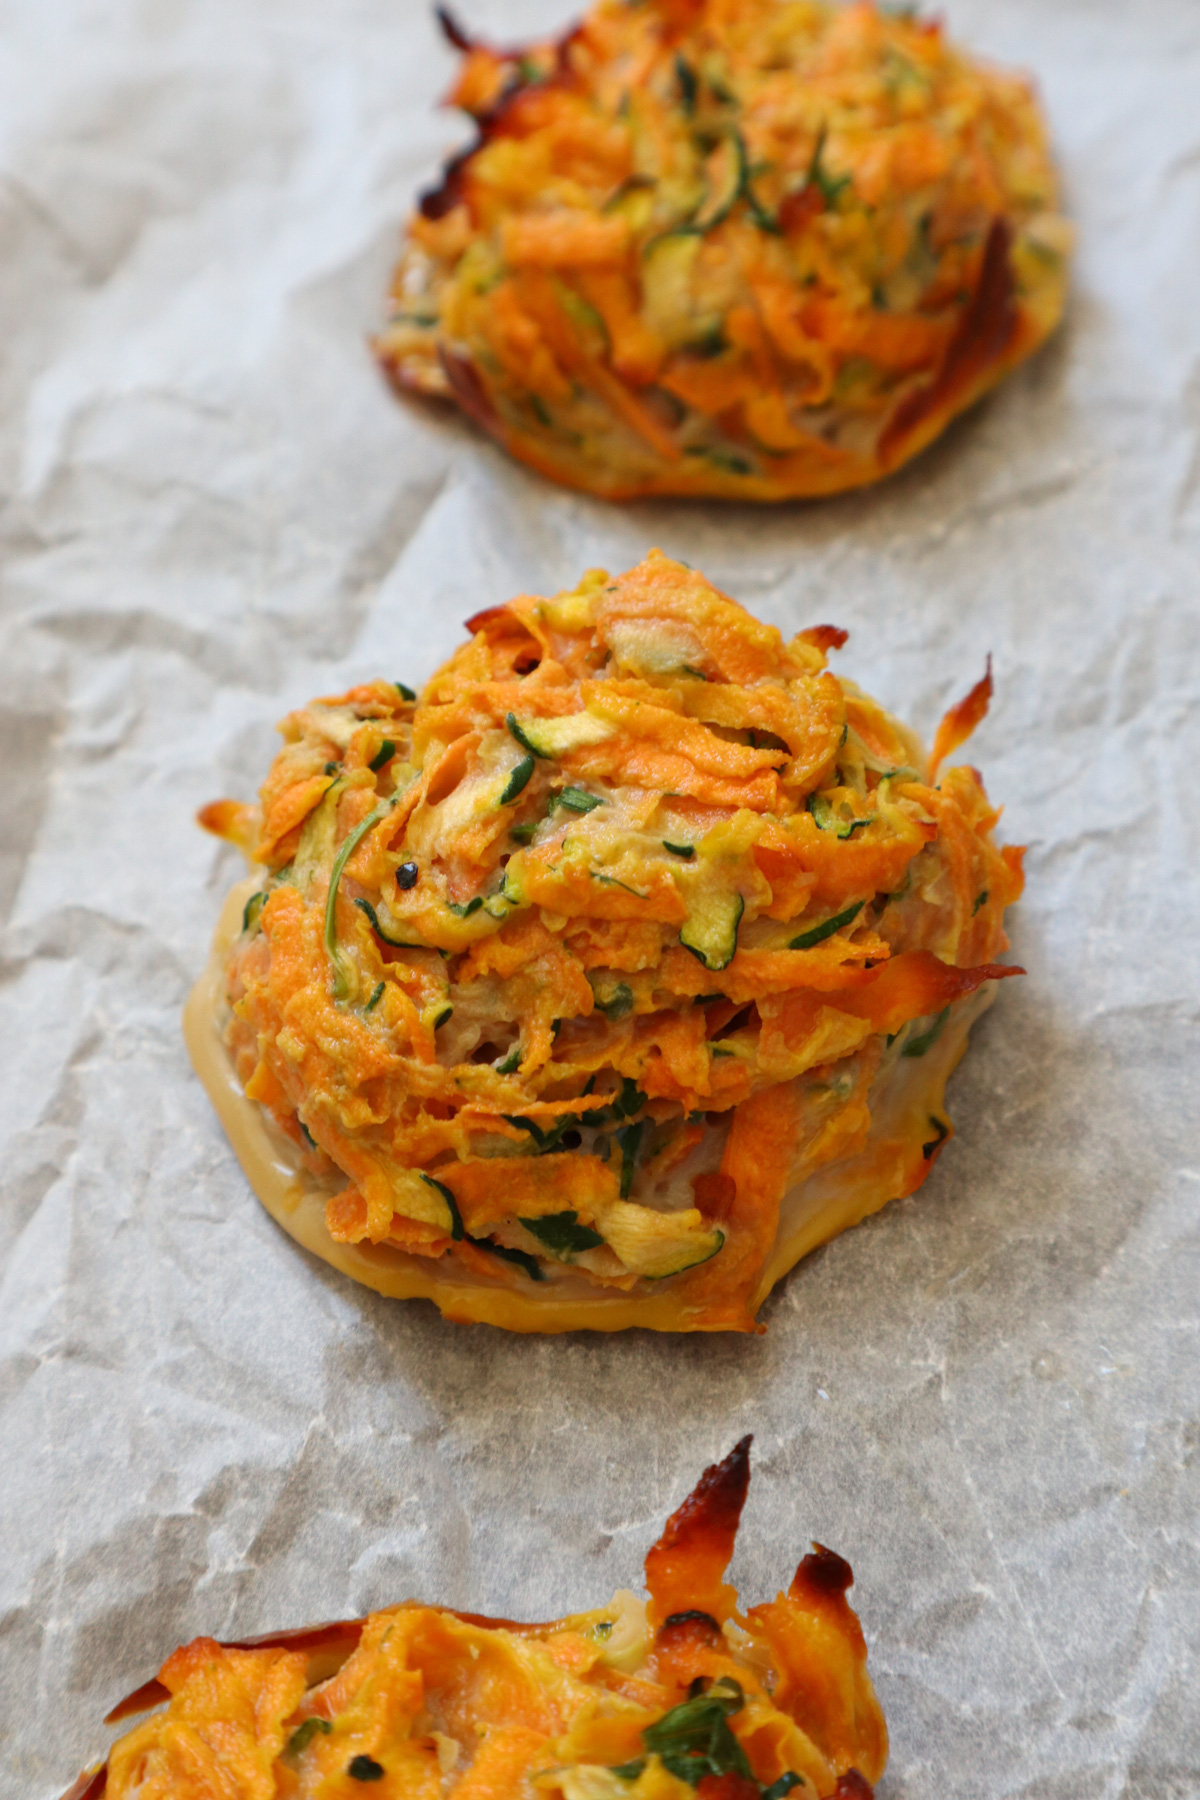 Baked sweet potato fritter on parchment paper.